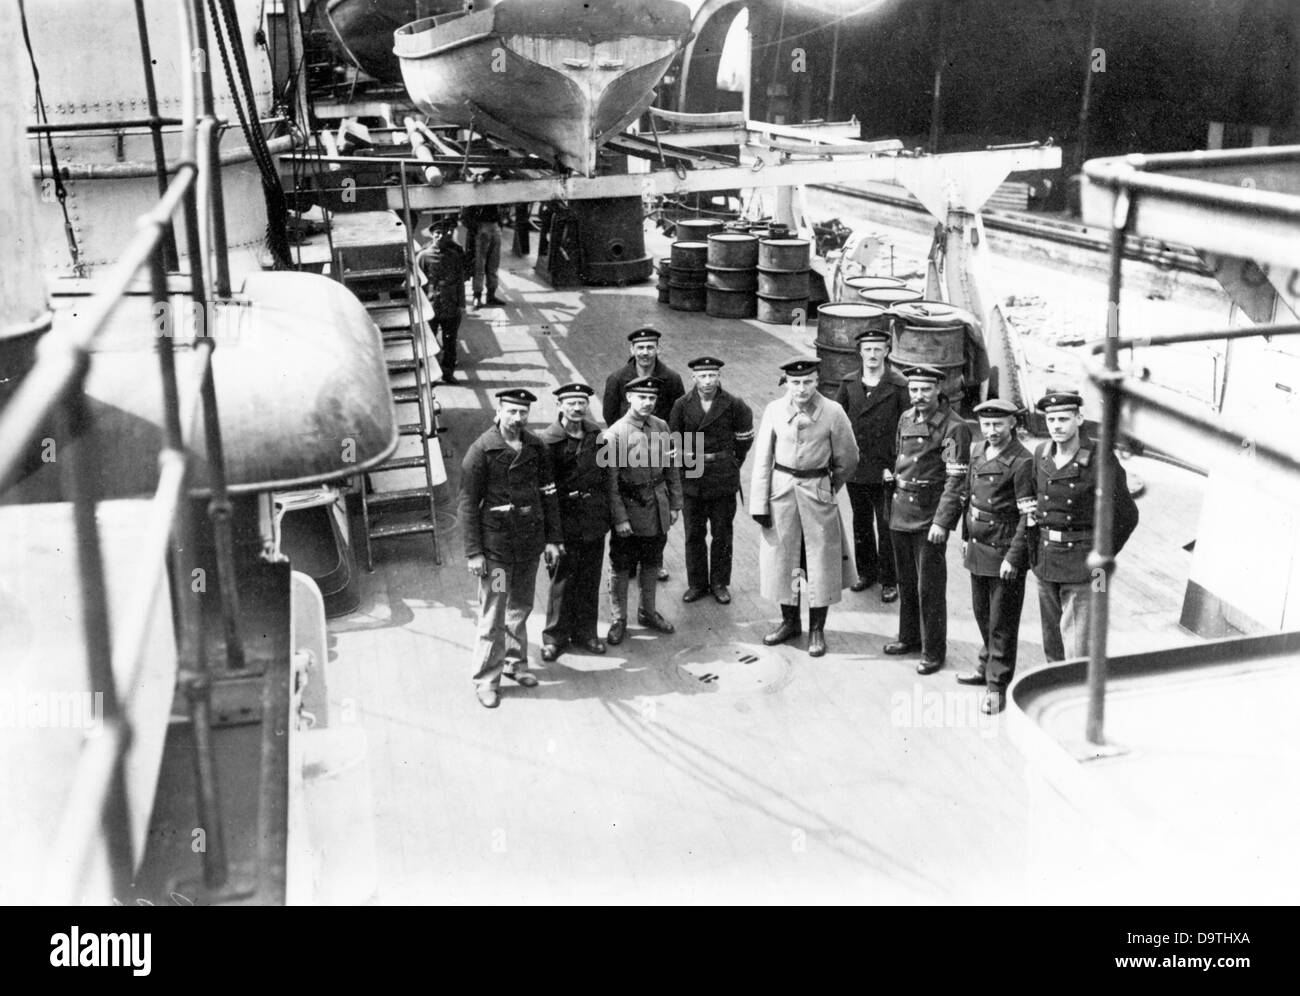 German Revolution 1918/1919: Port security commanders and non-commissioned officers are pictured on the cruiser SMS Freya of the German Imperial Navy in the harbor of Hamburg, Germany, in late 1918. Photo: Berliner Verlag/Archiv Stock Photo